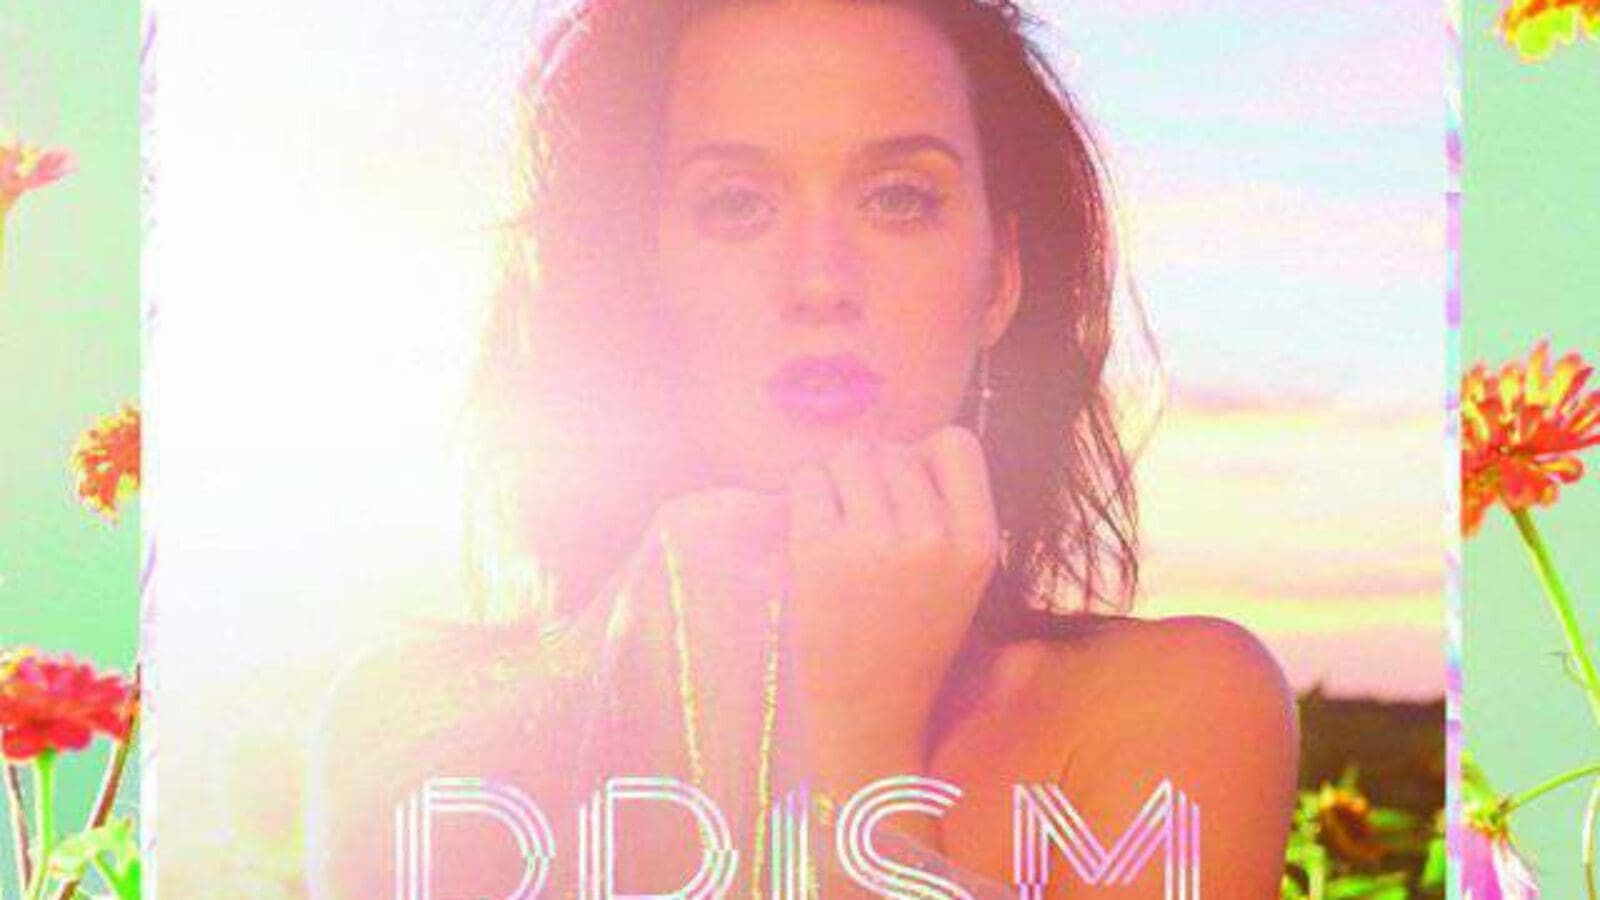 KATY PERRY PRISM